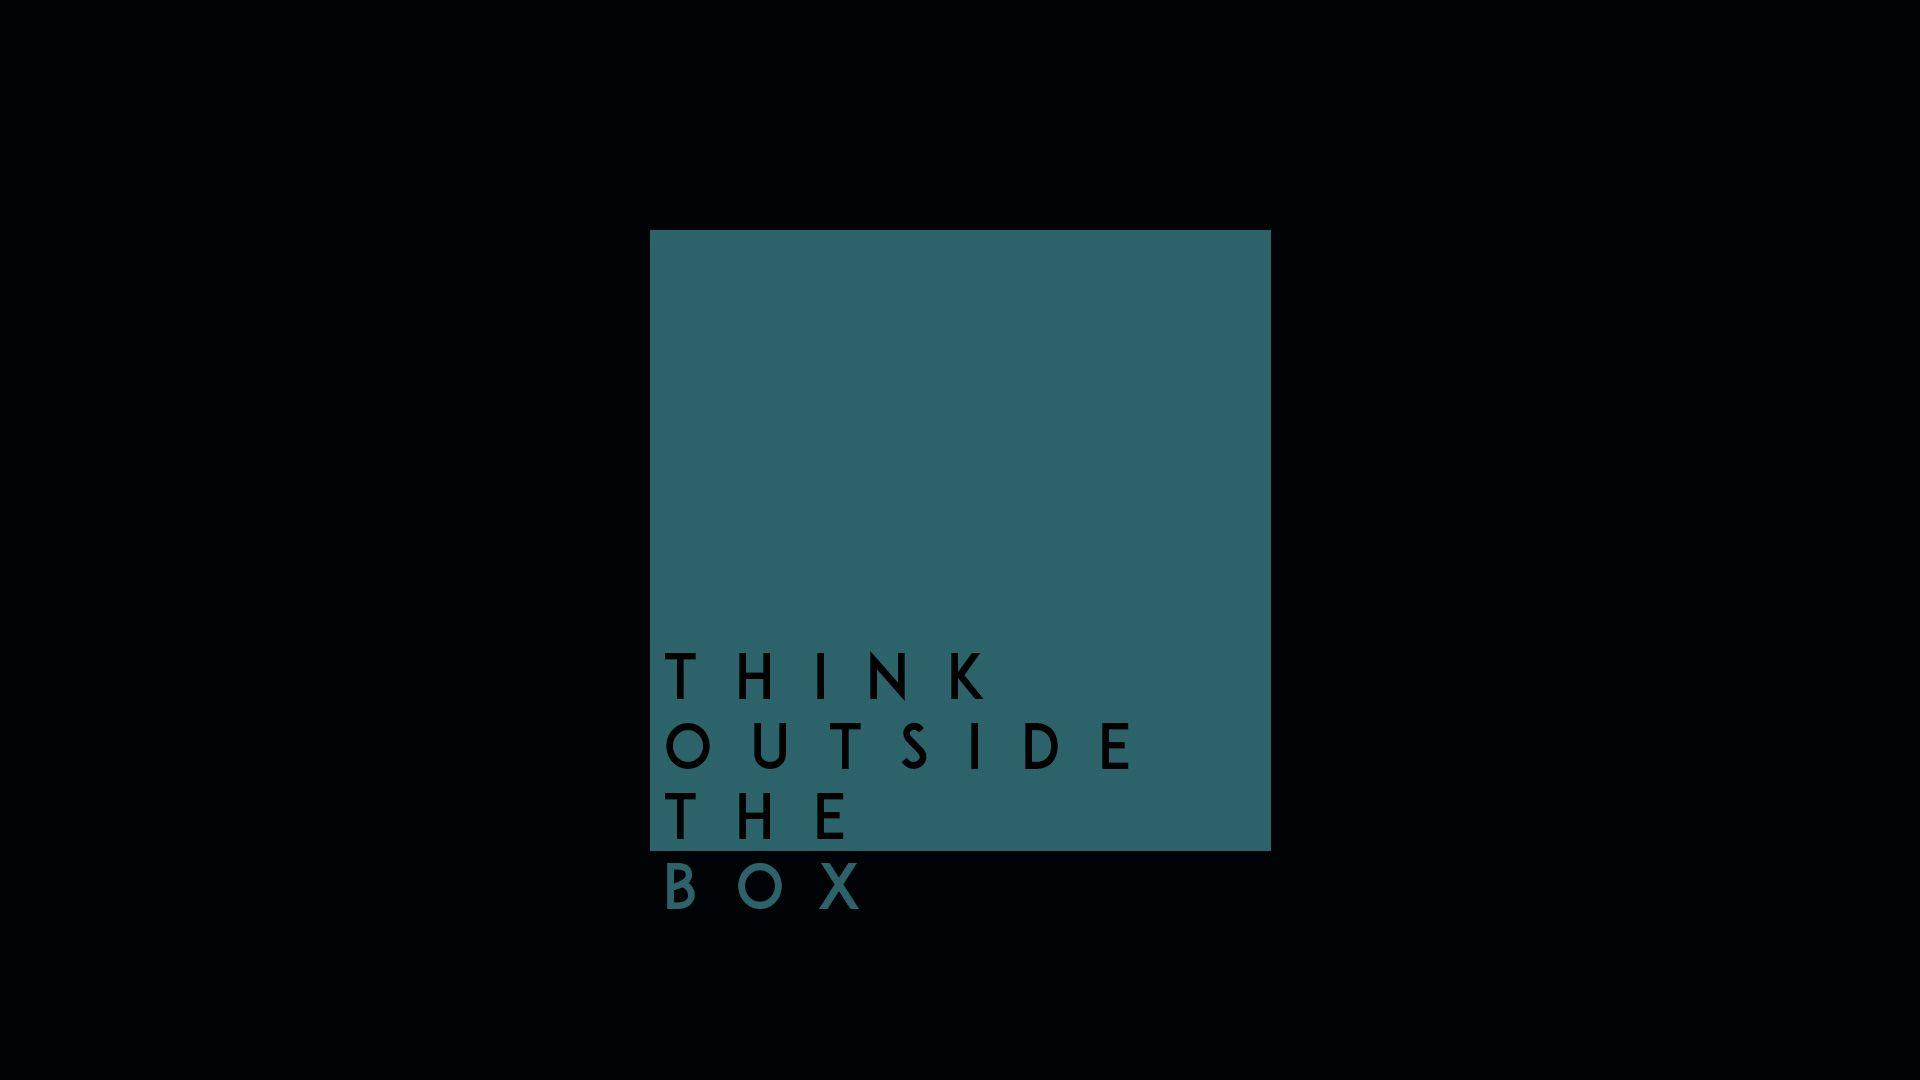 Think Outside The Box HD, HD Typography, 4k Wallpaper, Image